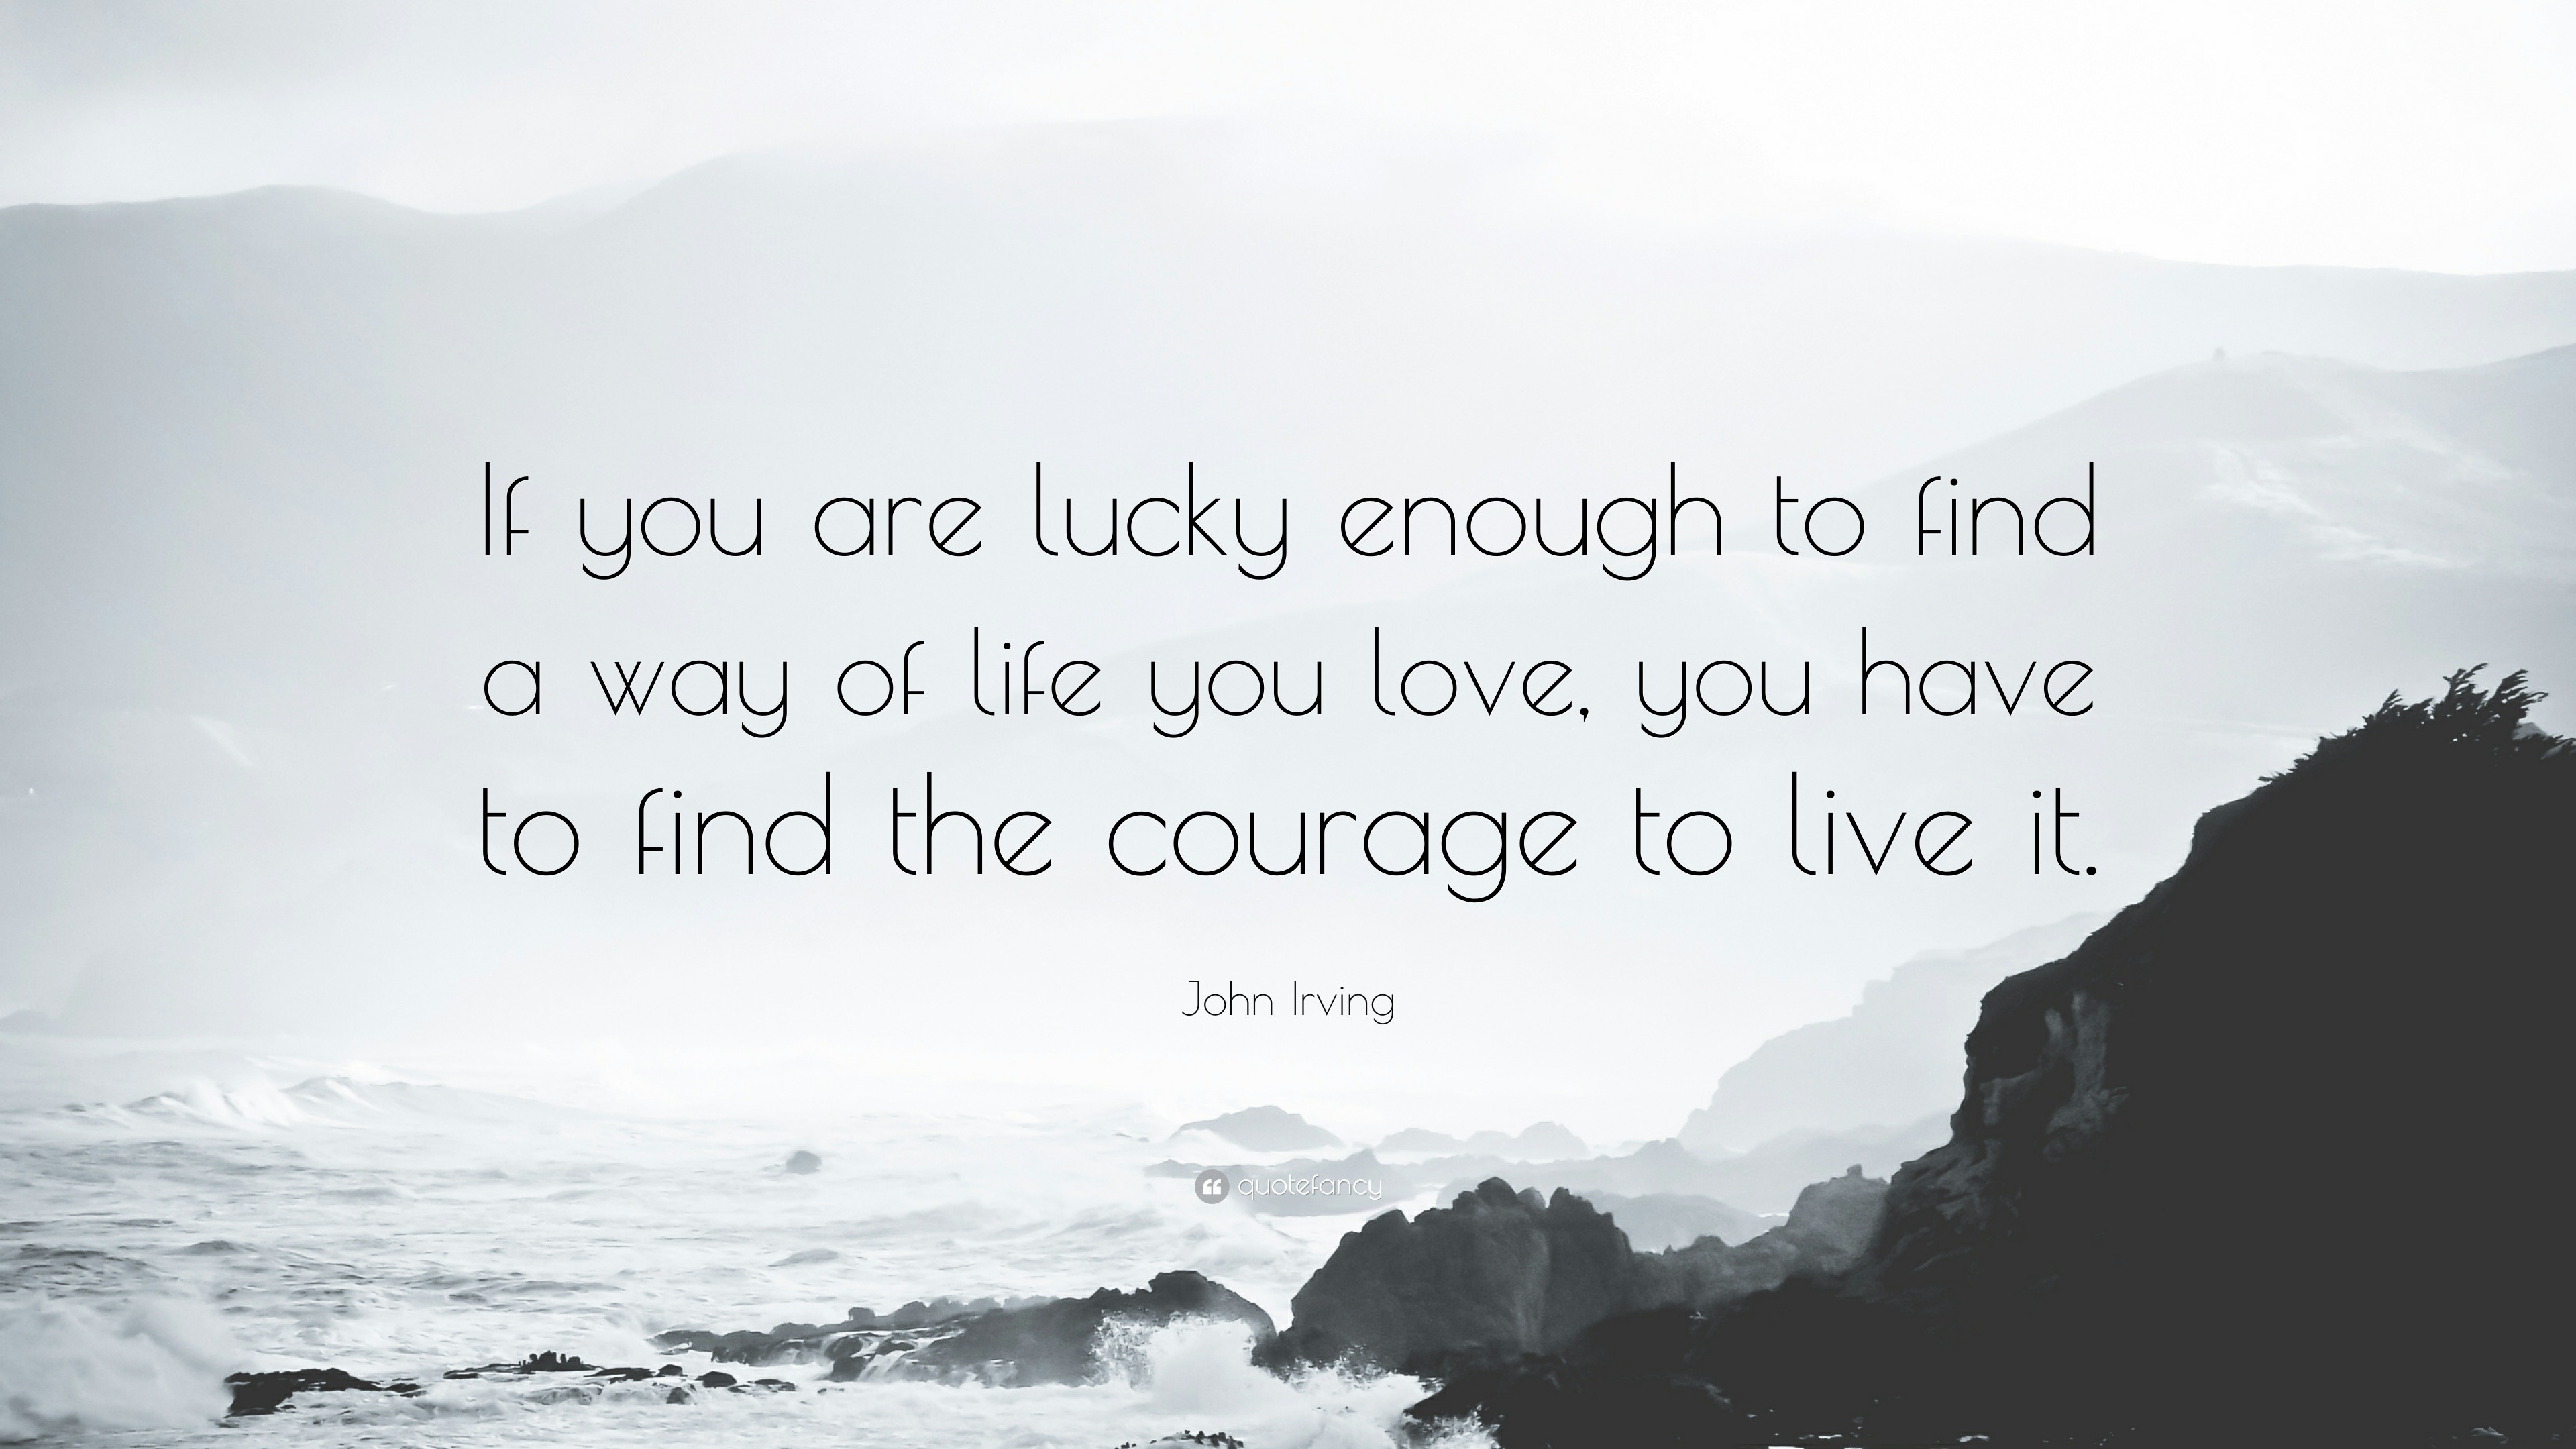 John Irving Quote “If you are lucky enough to find a way of life